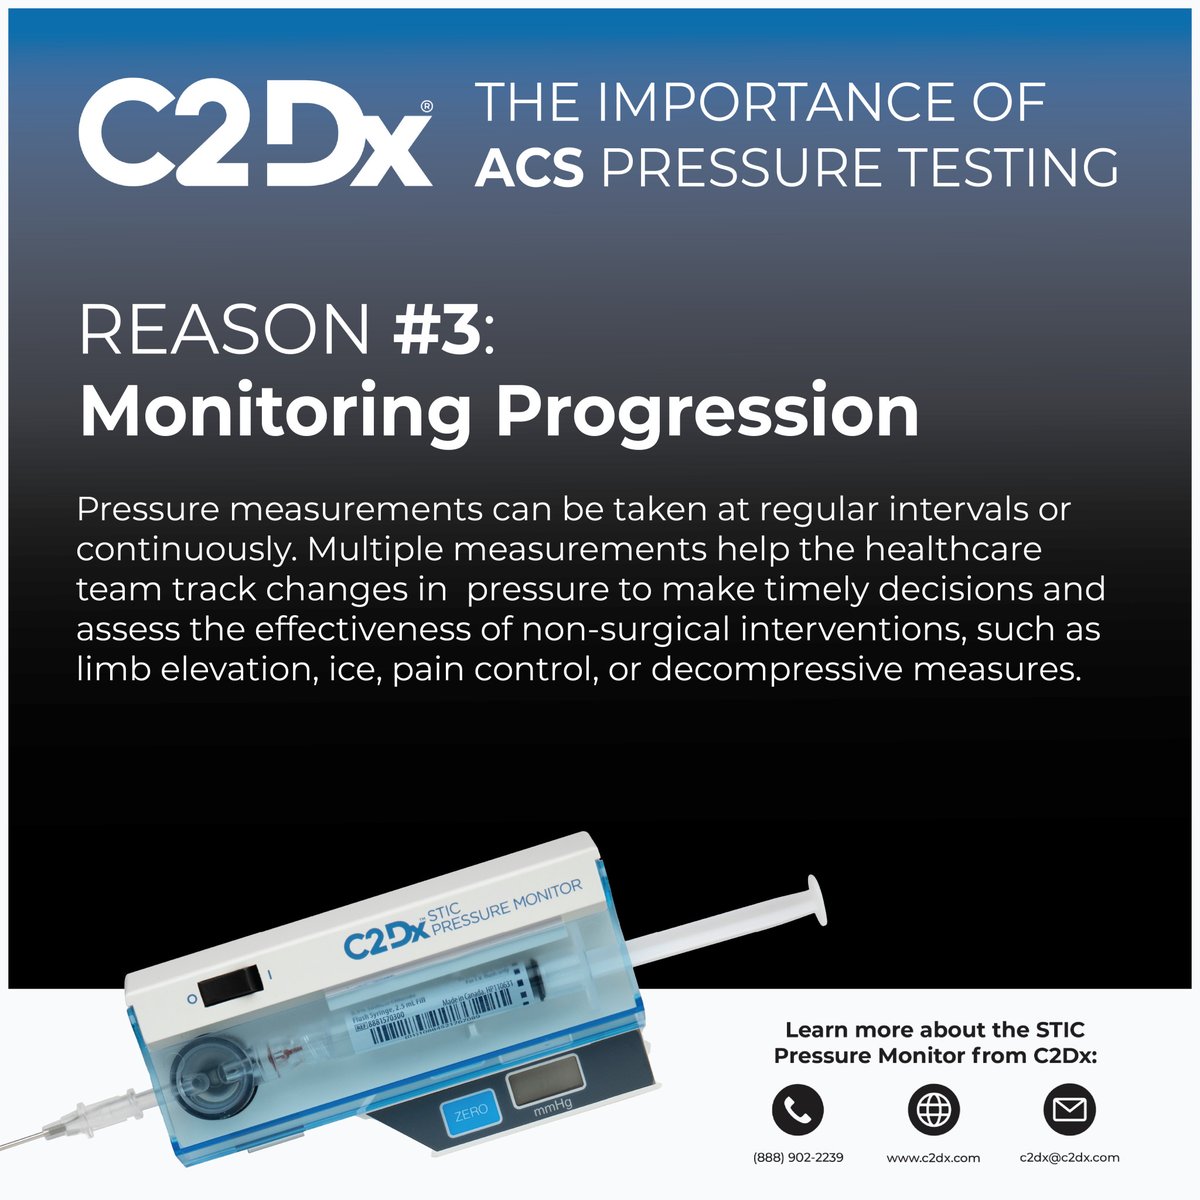 Testing with the STIC Pressure Monitor from #C2Dx, is a crucial step to aid in the evaluation of Acute #CompartmentSyndrome. Here are 3 reasons why this testing is important.

Learn more about ACS and the STIC Pressure Monitor in our new white paper: scnv.io/ACSWhitePaper